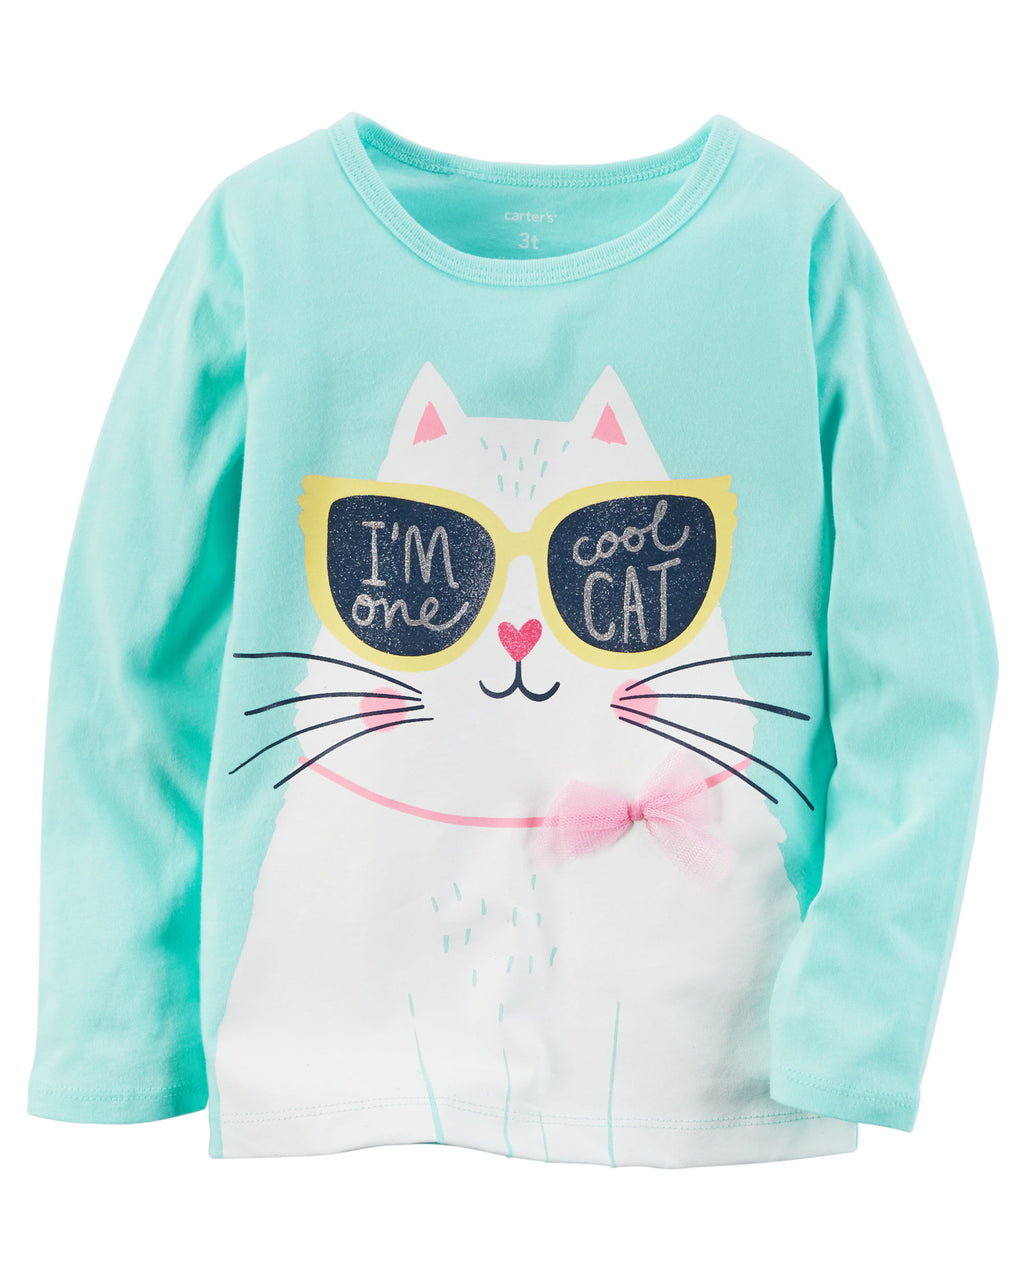 Remera CARTERS Long-Sleeve One Cool Cat Graphic Tee